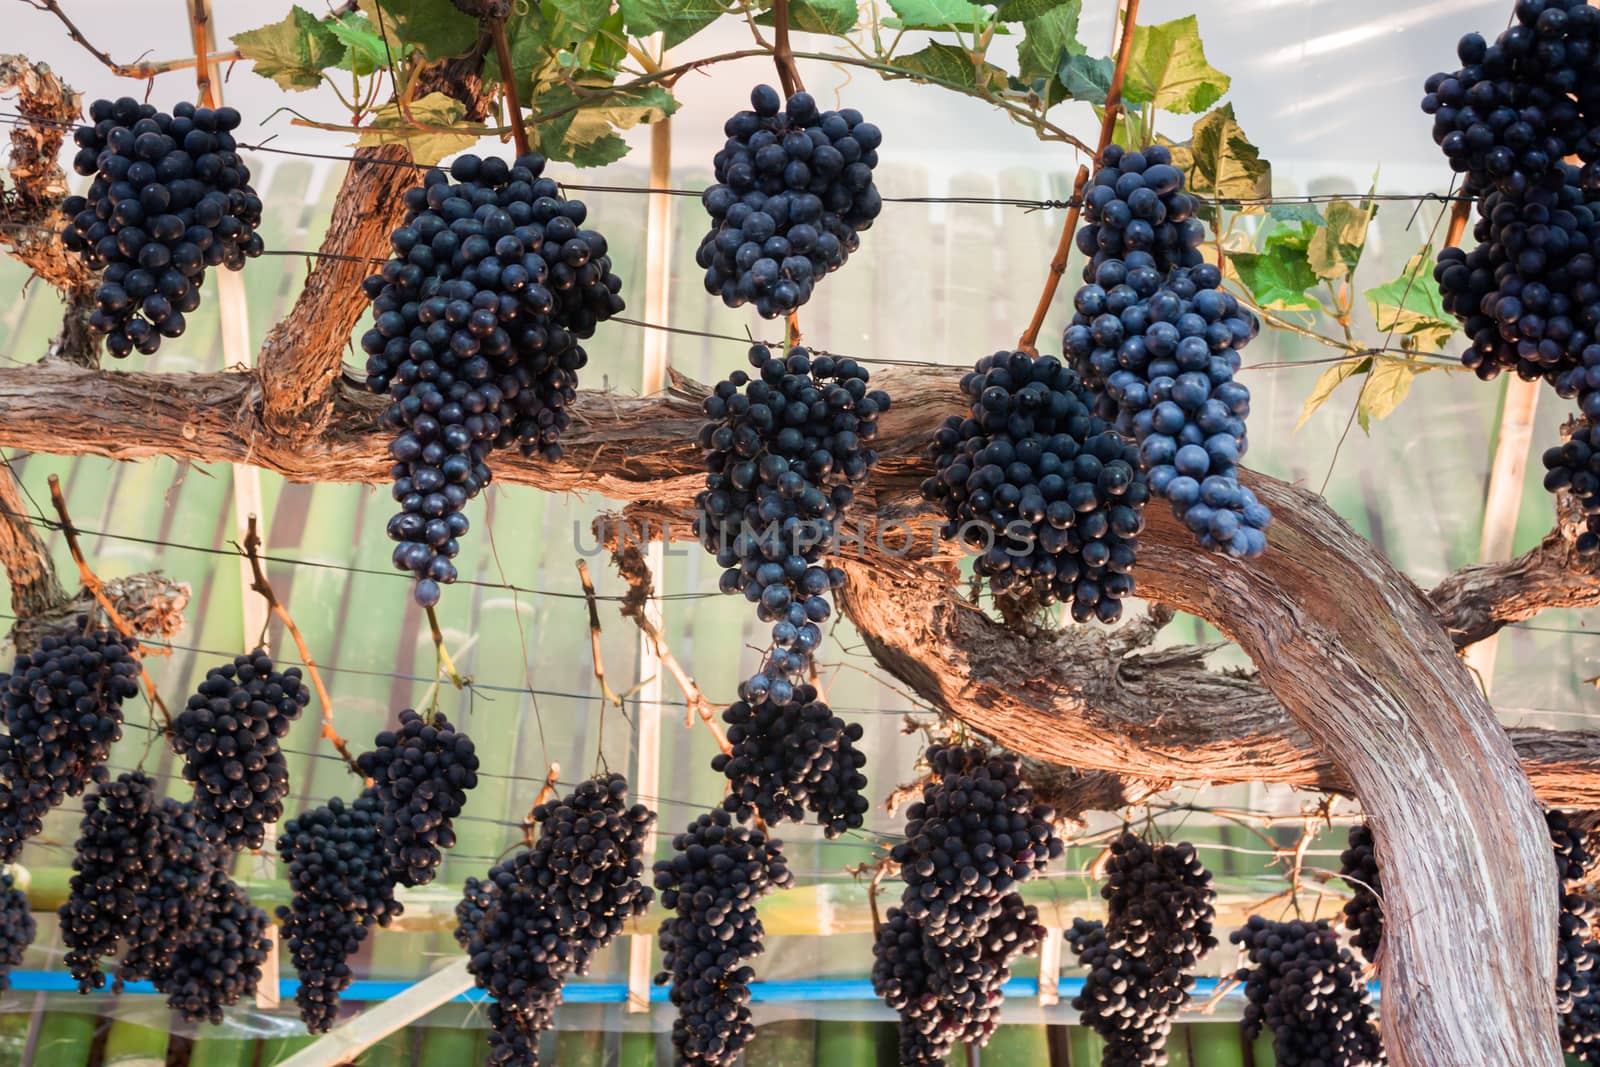 Bunches of grapes hang from a vine, stock photo